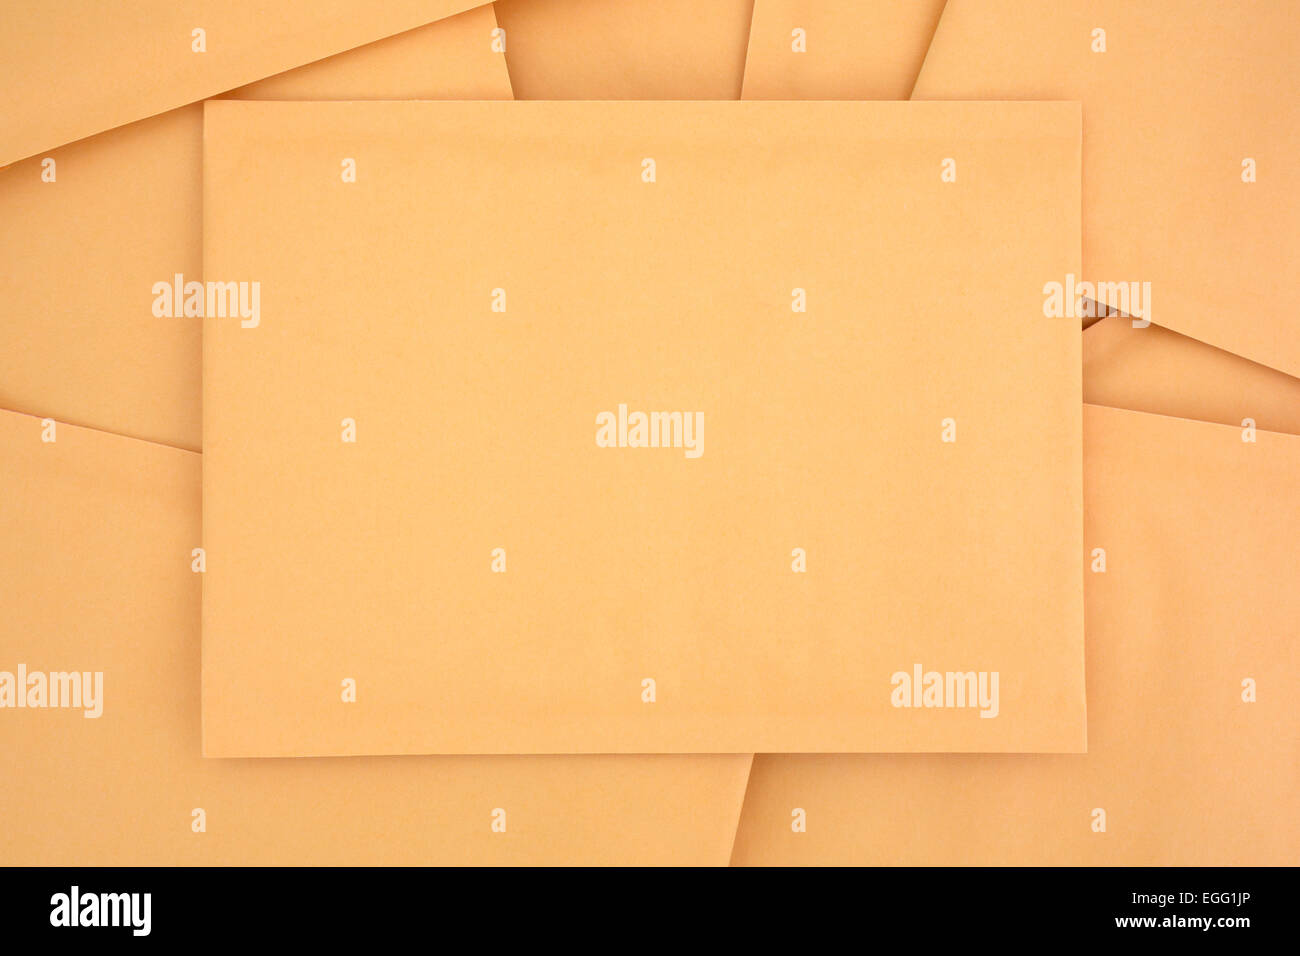 Top view of a group of blank manila padded mailing envelopes. Stock Photo